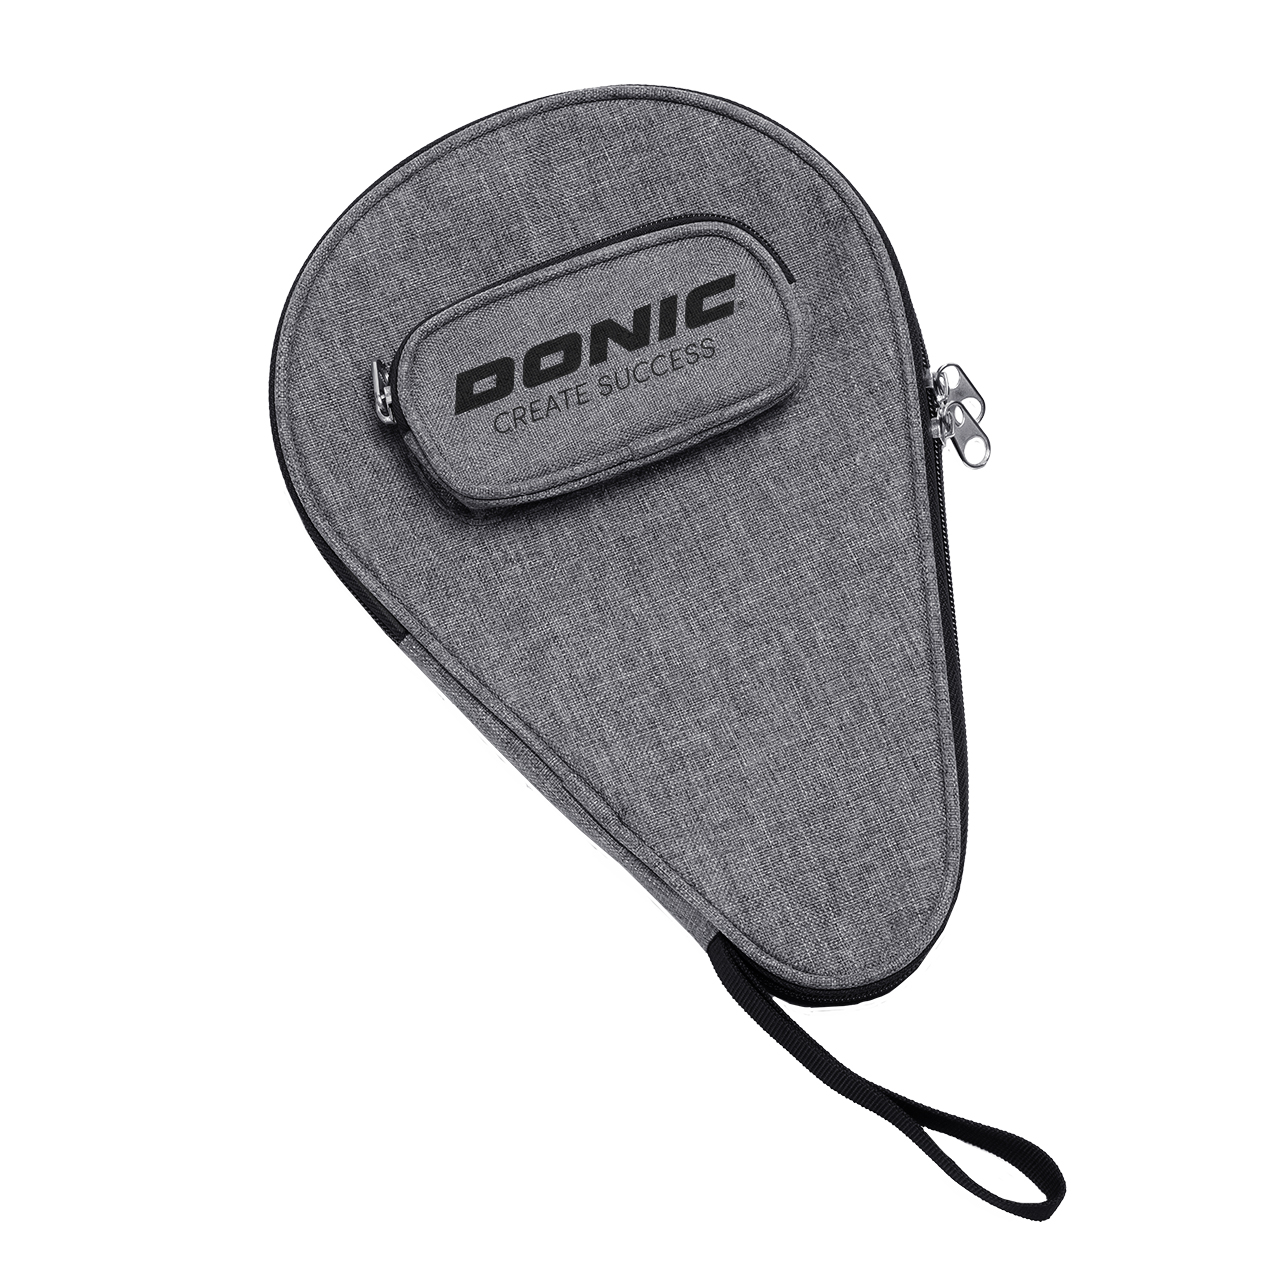 Donic Tarpo Basic Round Batcover, with compartment